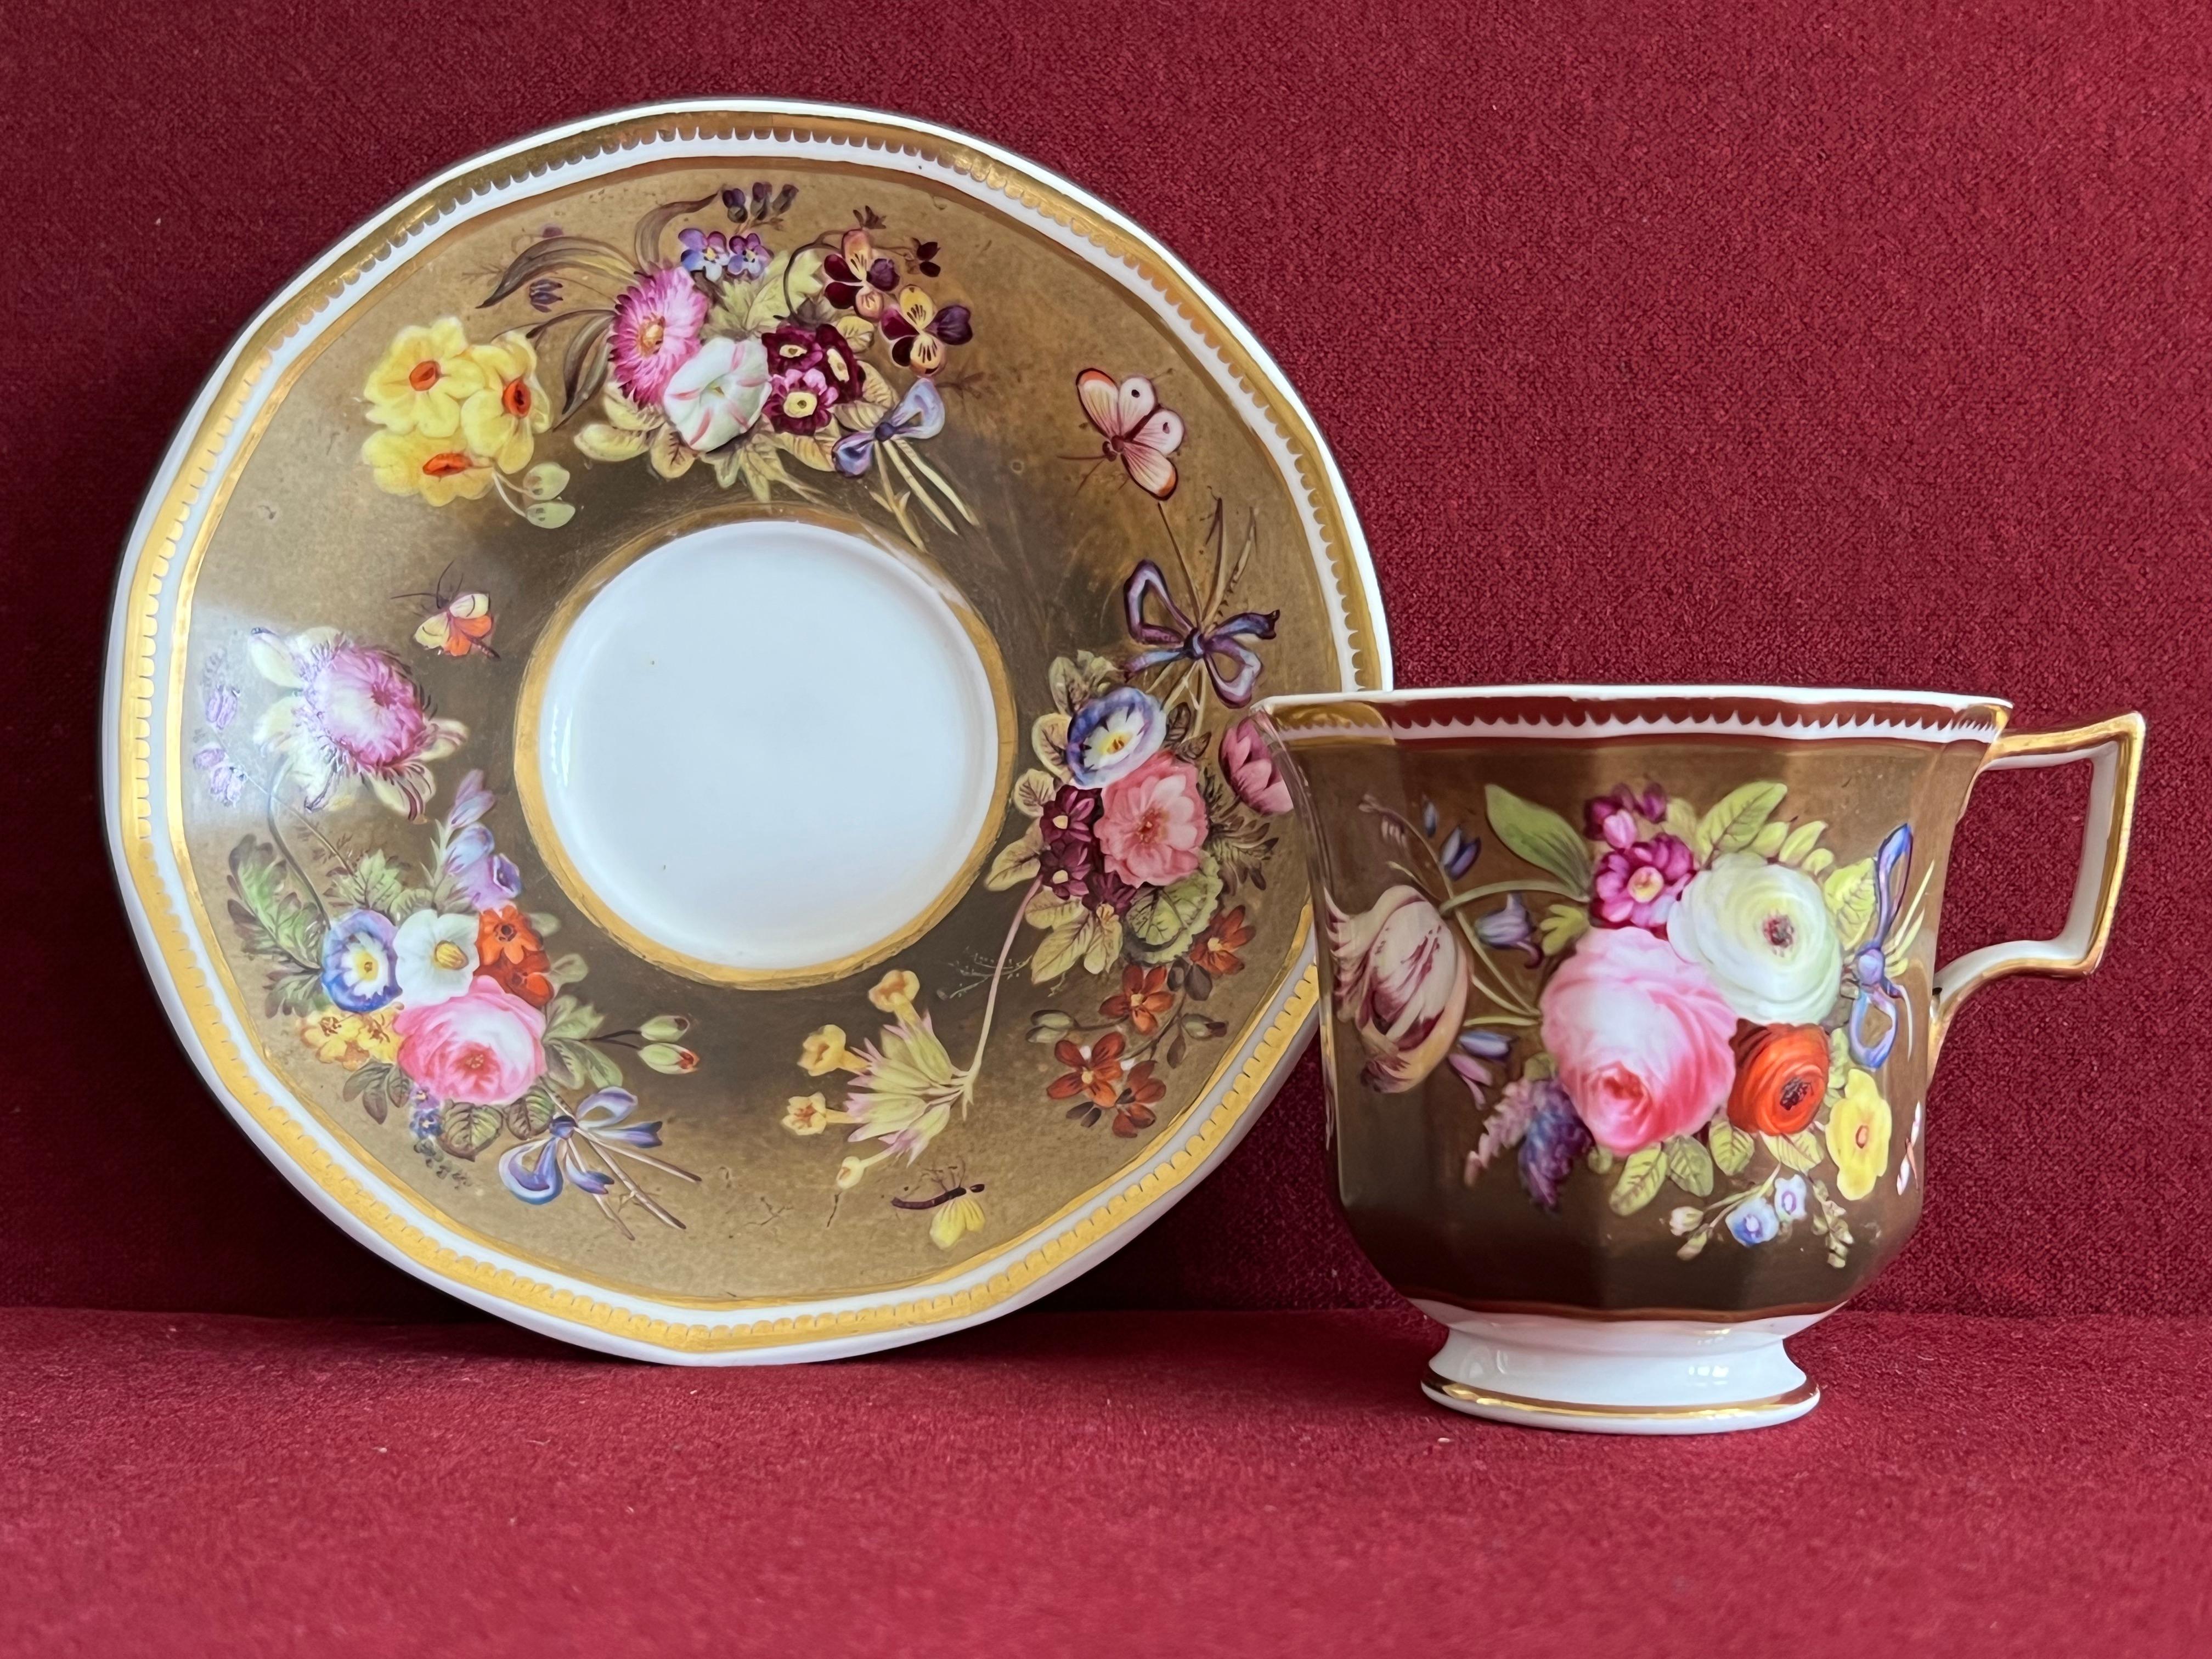 A Spode porcelain Coffee Cup and Saucer very finely decorated c.1830 For Sale 1